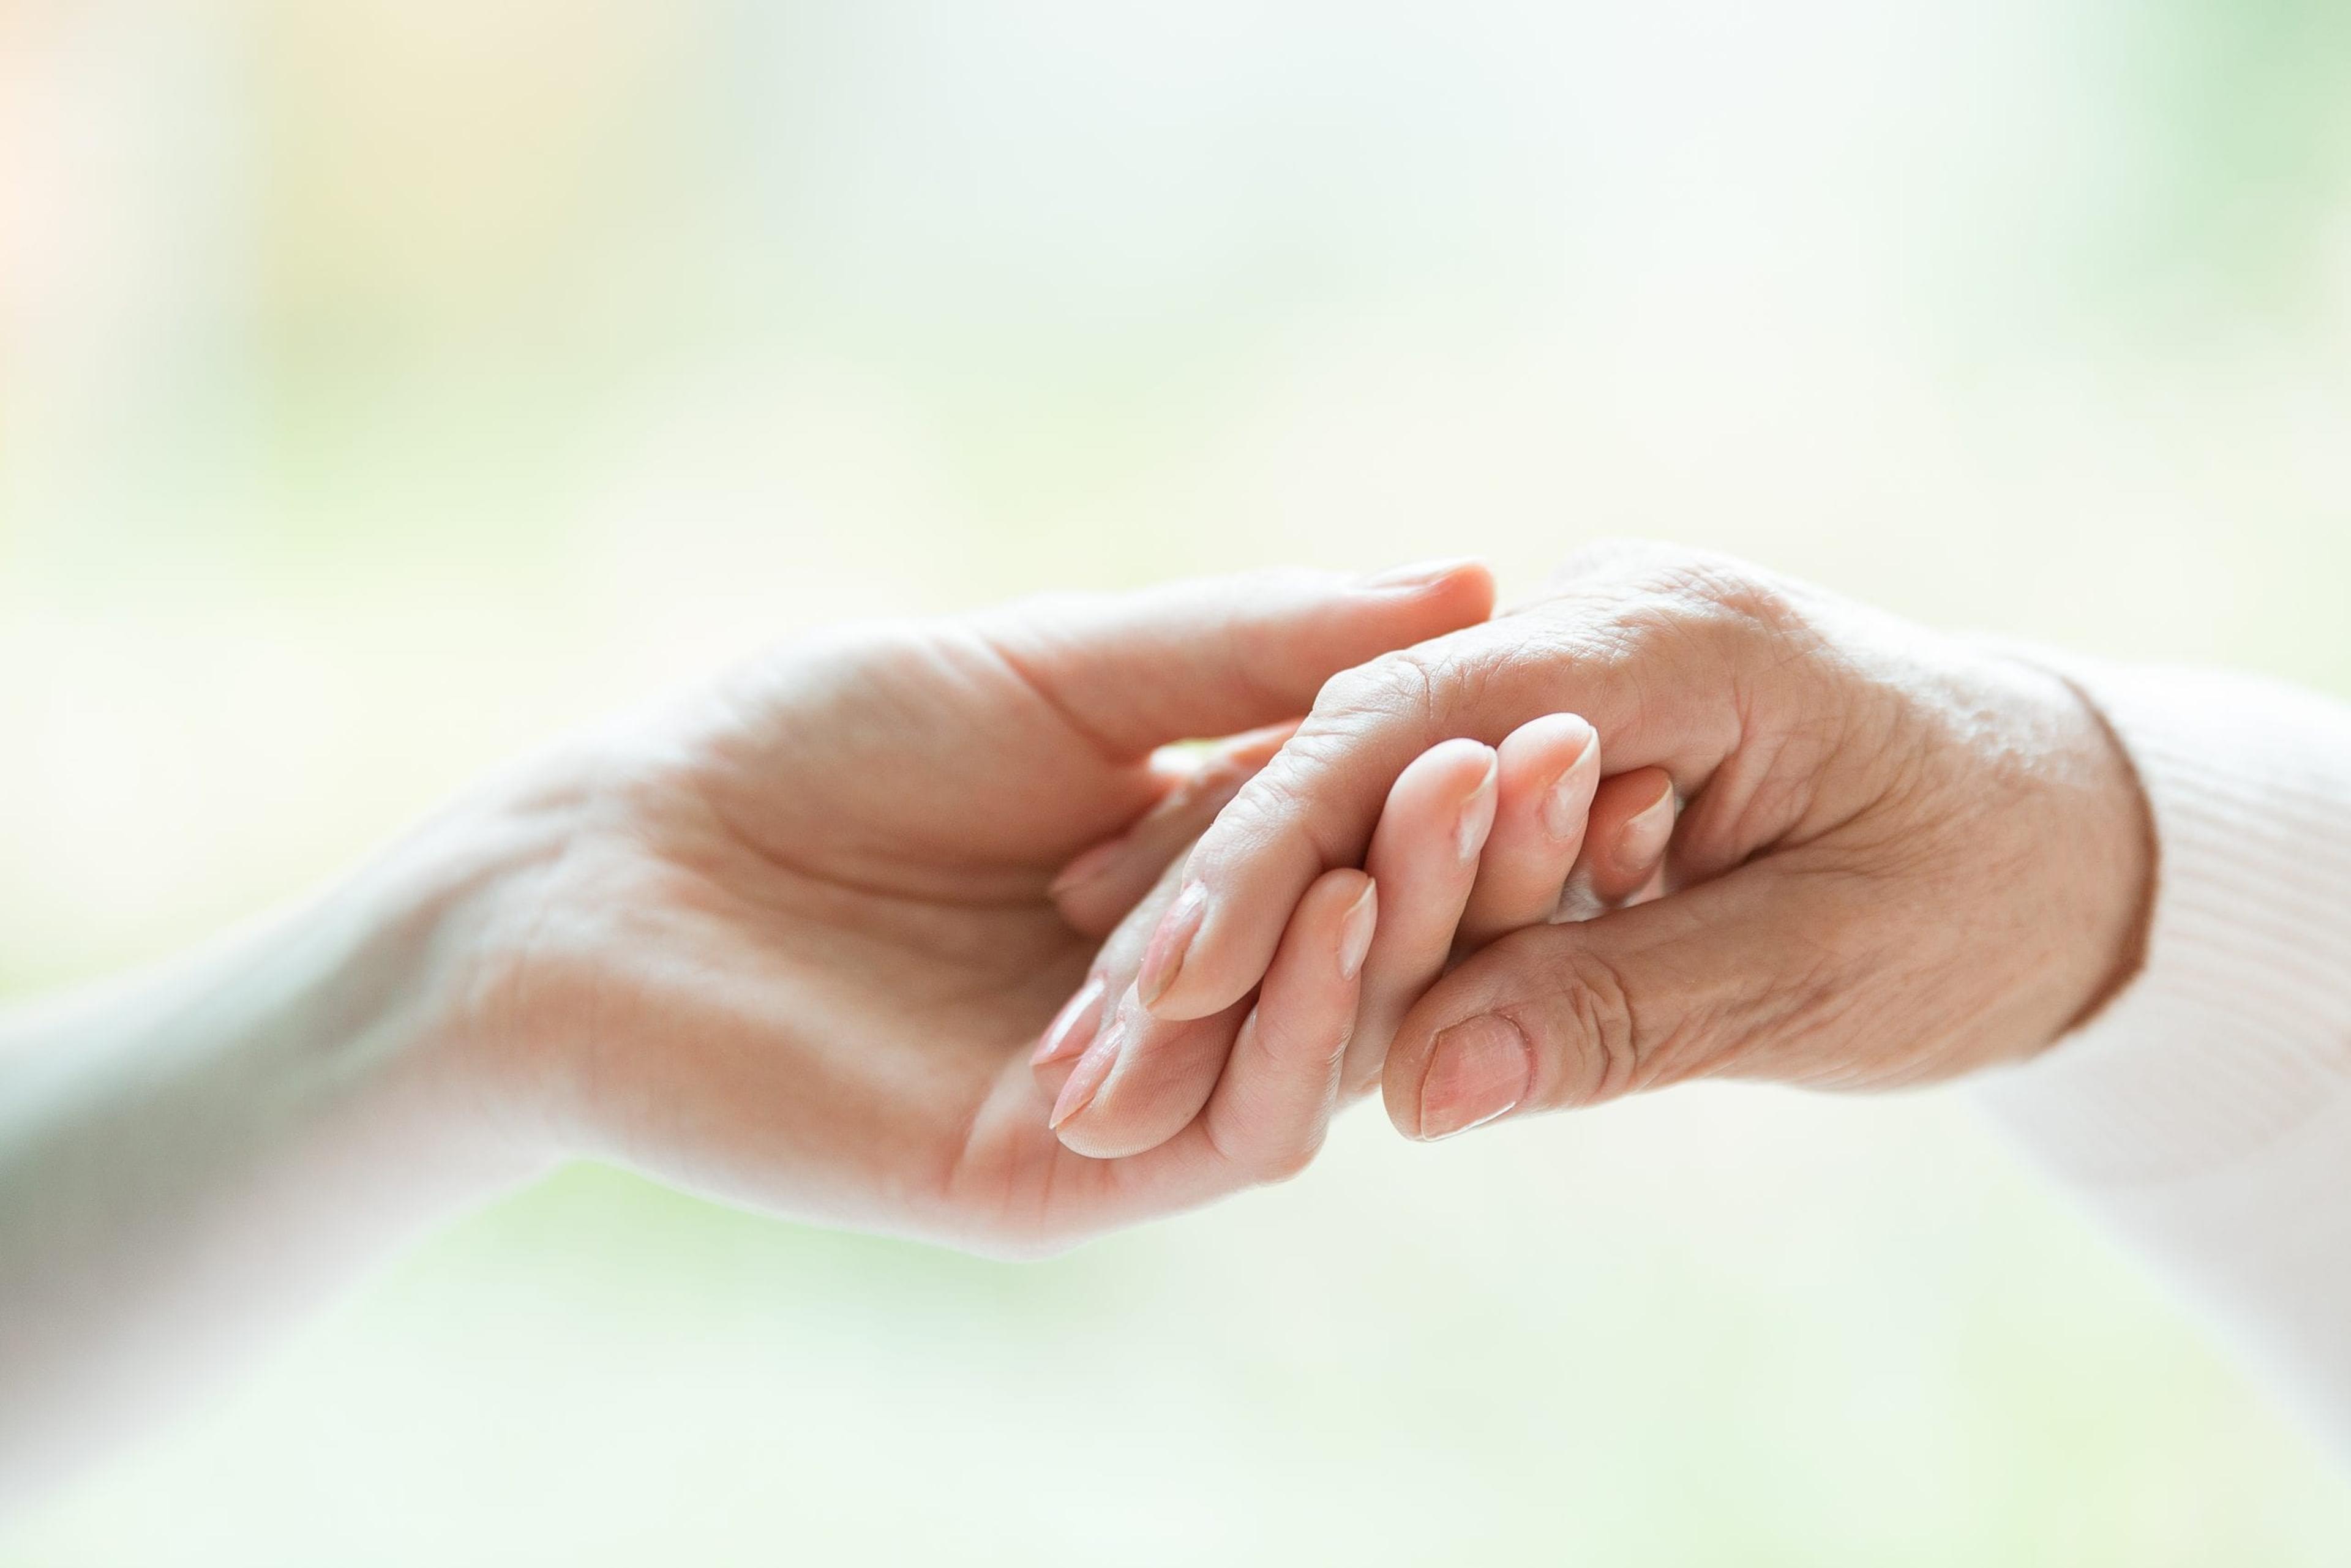 Photo of a young hand holding an older hand.